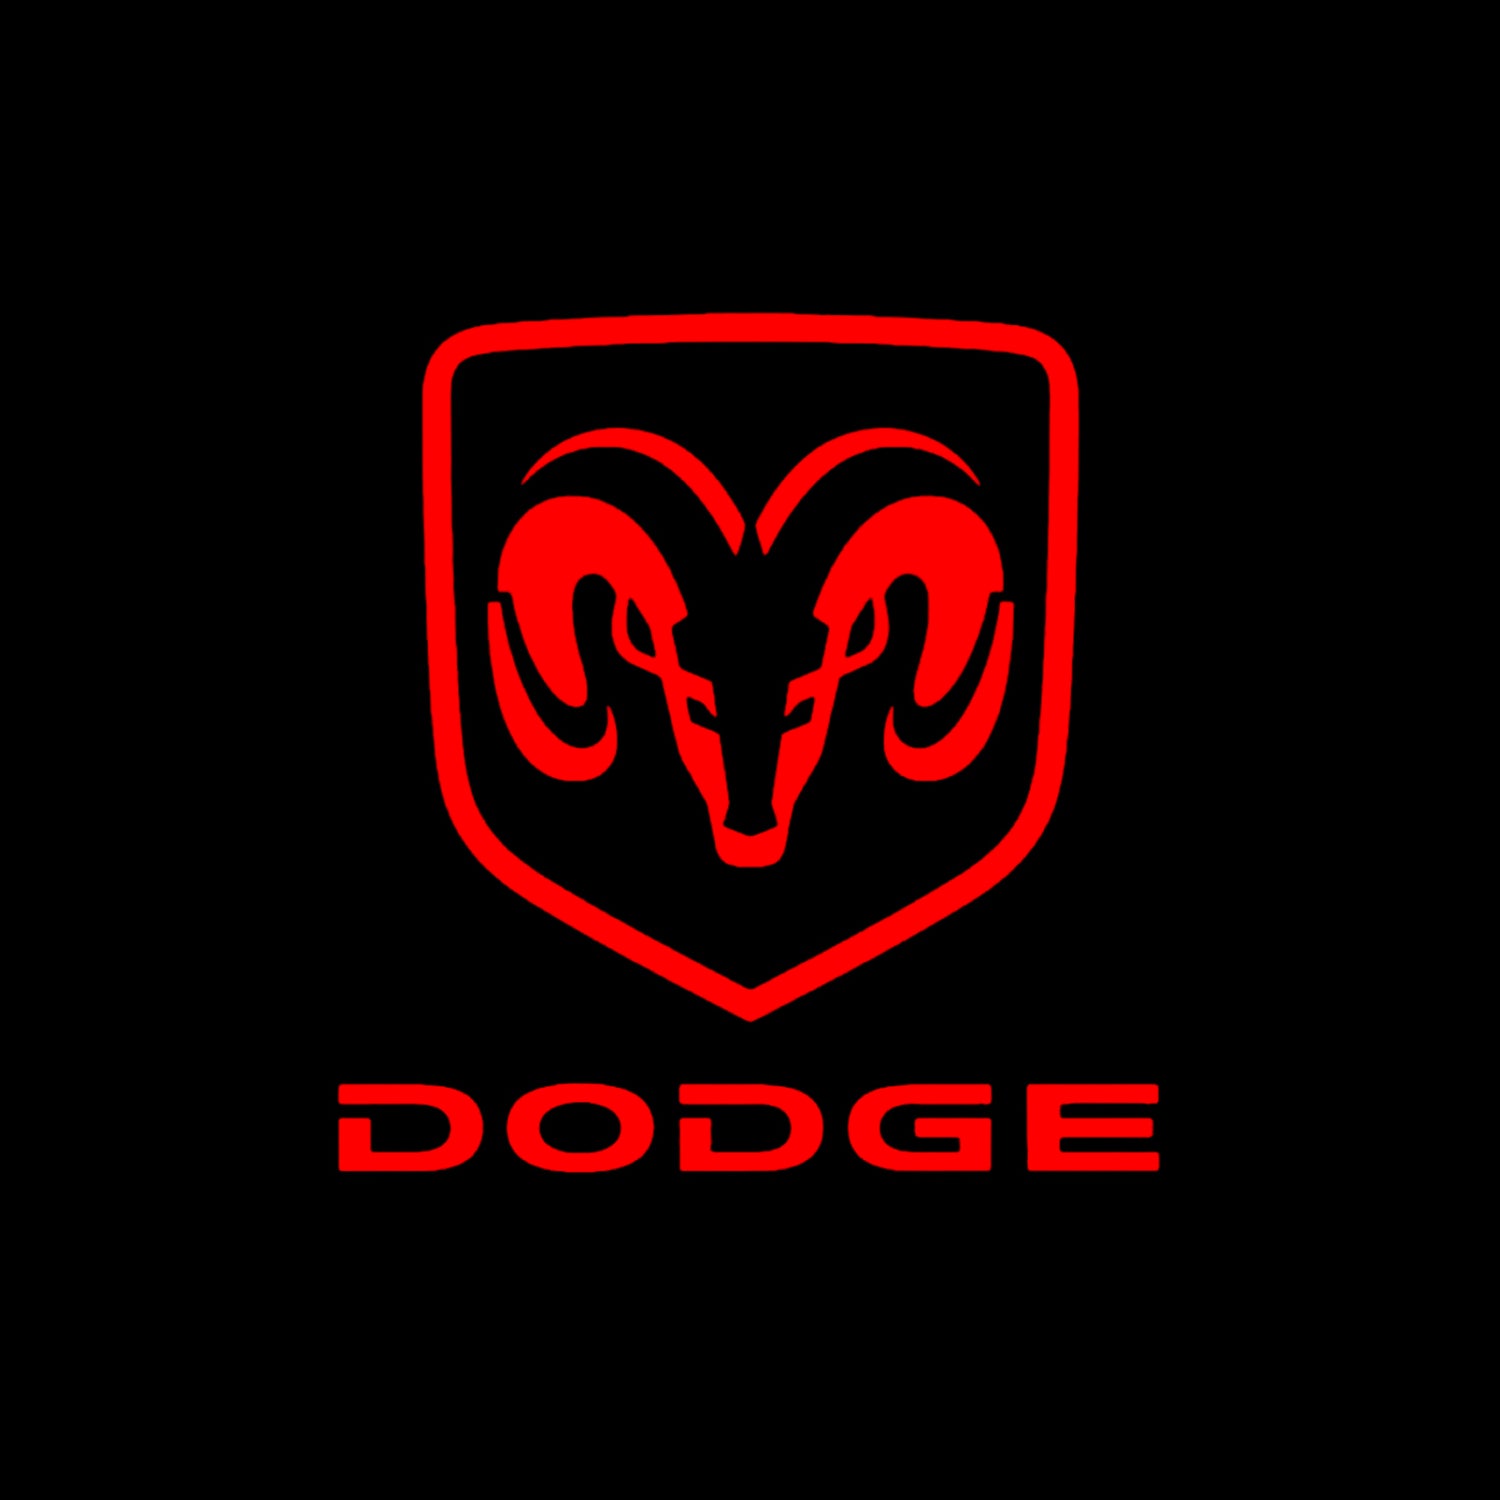 Dodge logo in red with black background